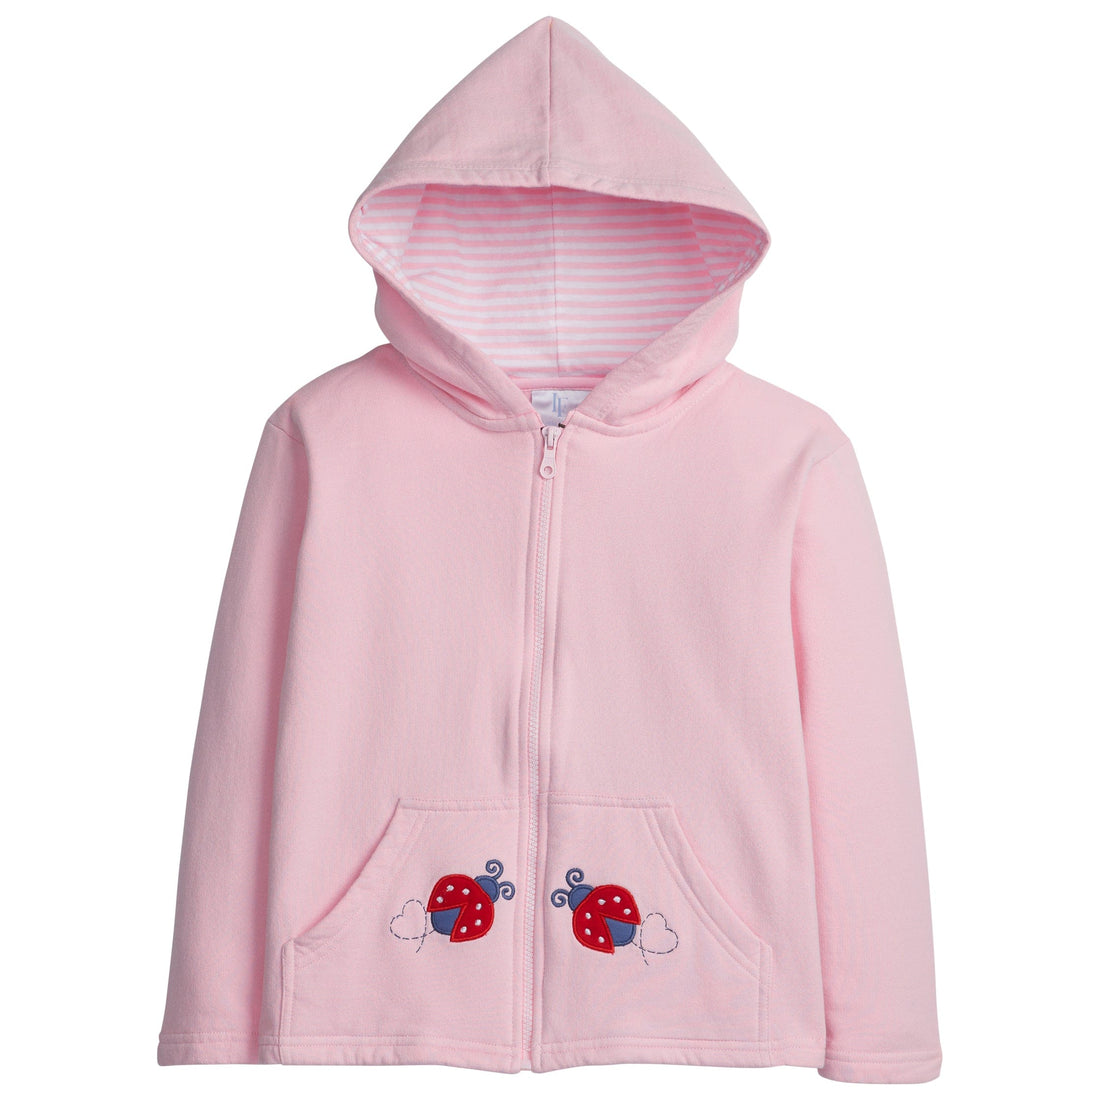 little english classic childrens clothing girls pink zip up hoodie with applique lady bugs on pockets